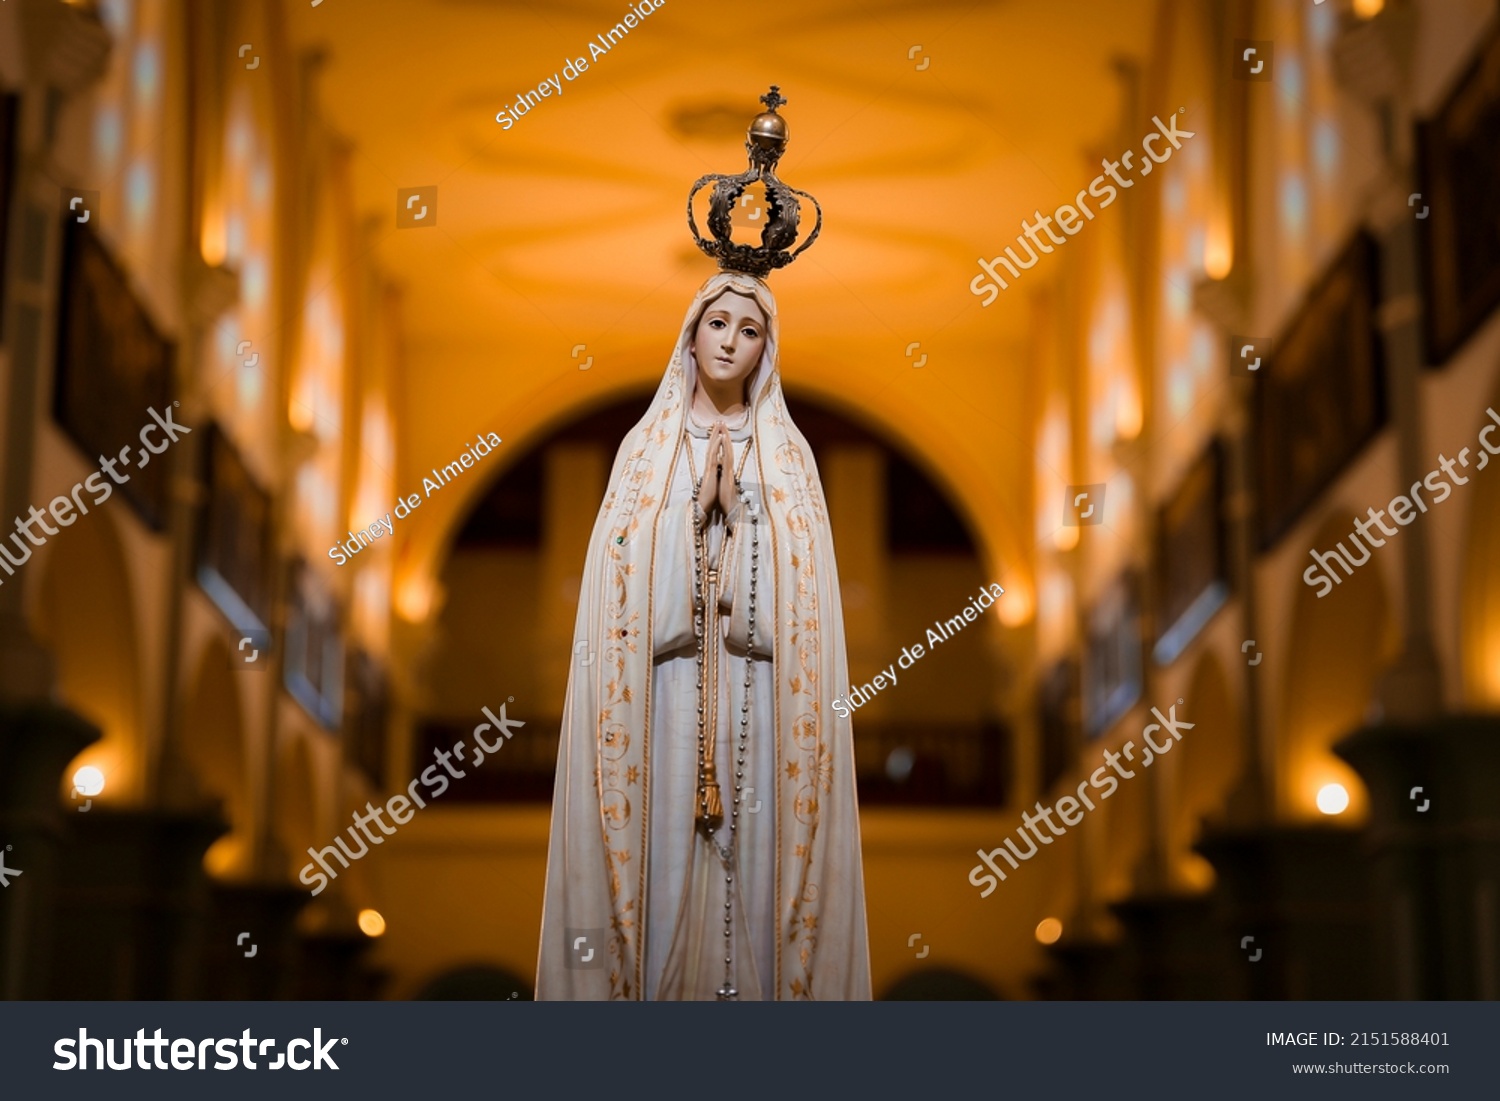 Our Lady of Fatima statue of the image, Our Lady of the Rosary of Fatima, Virgin Mary #2151588401